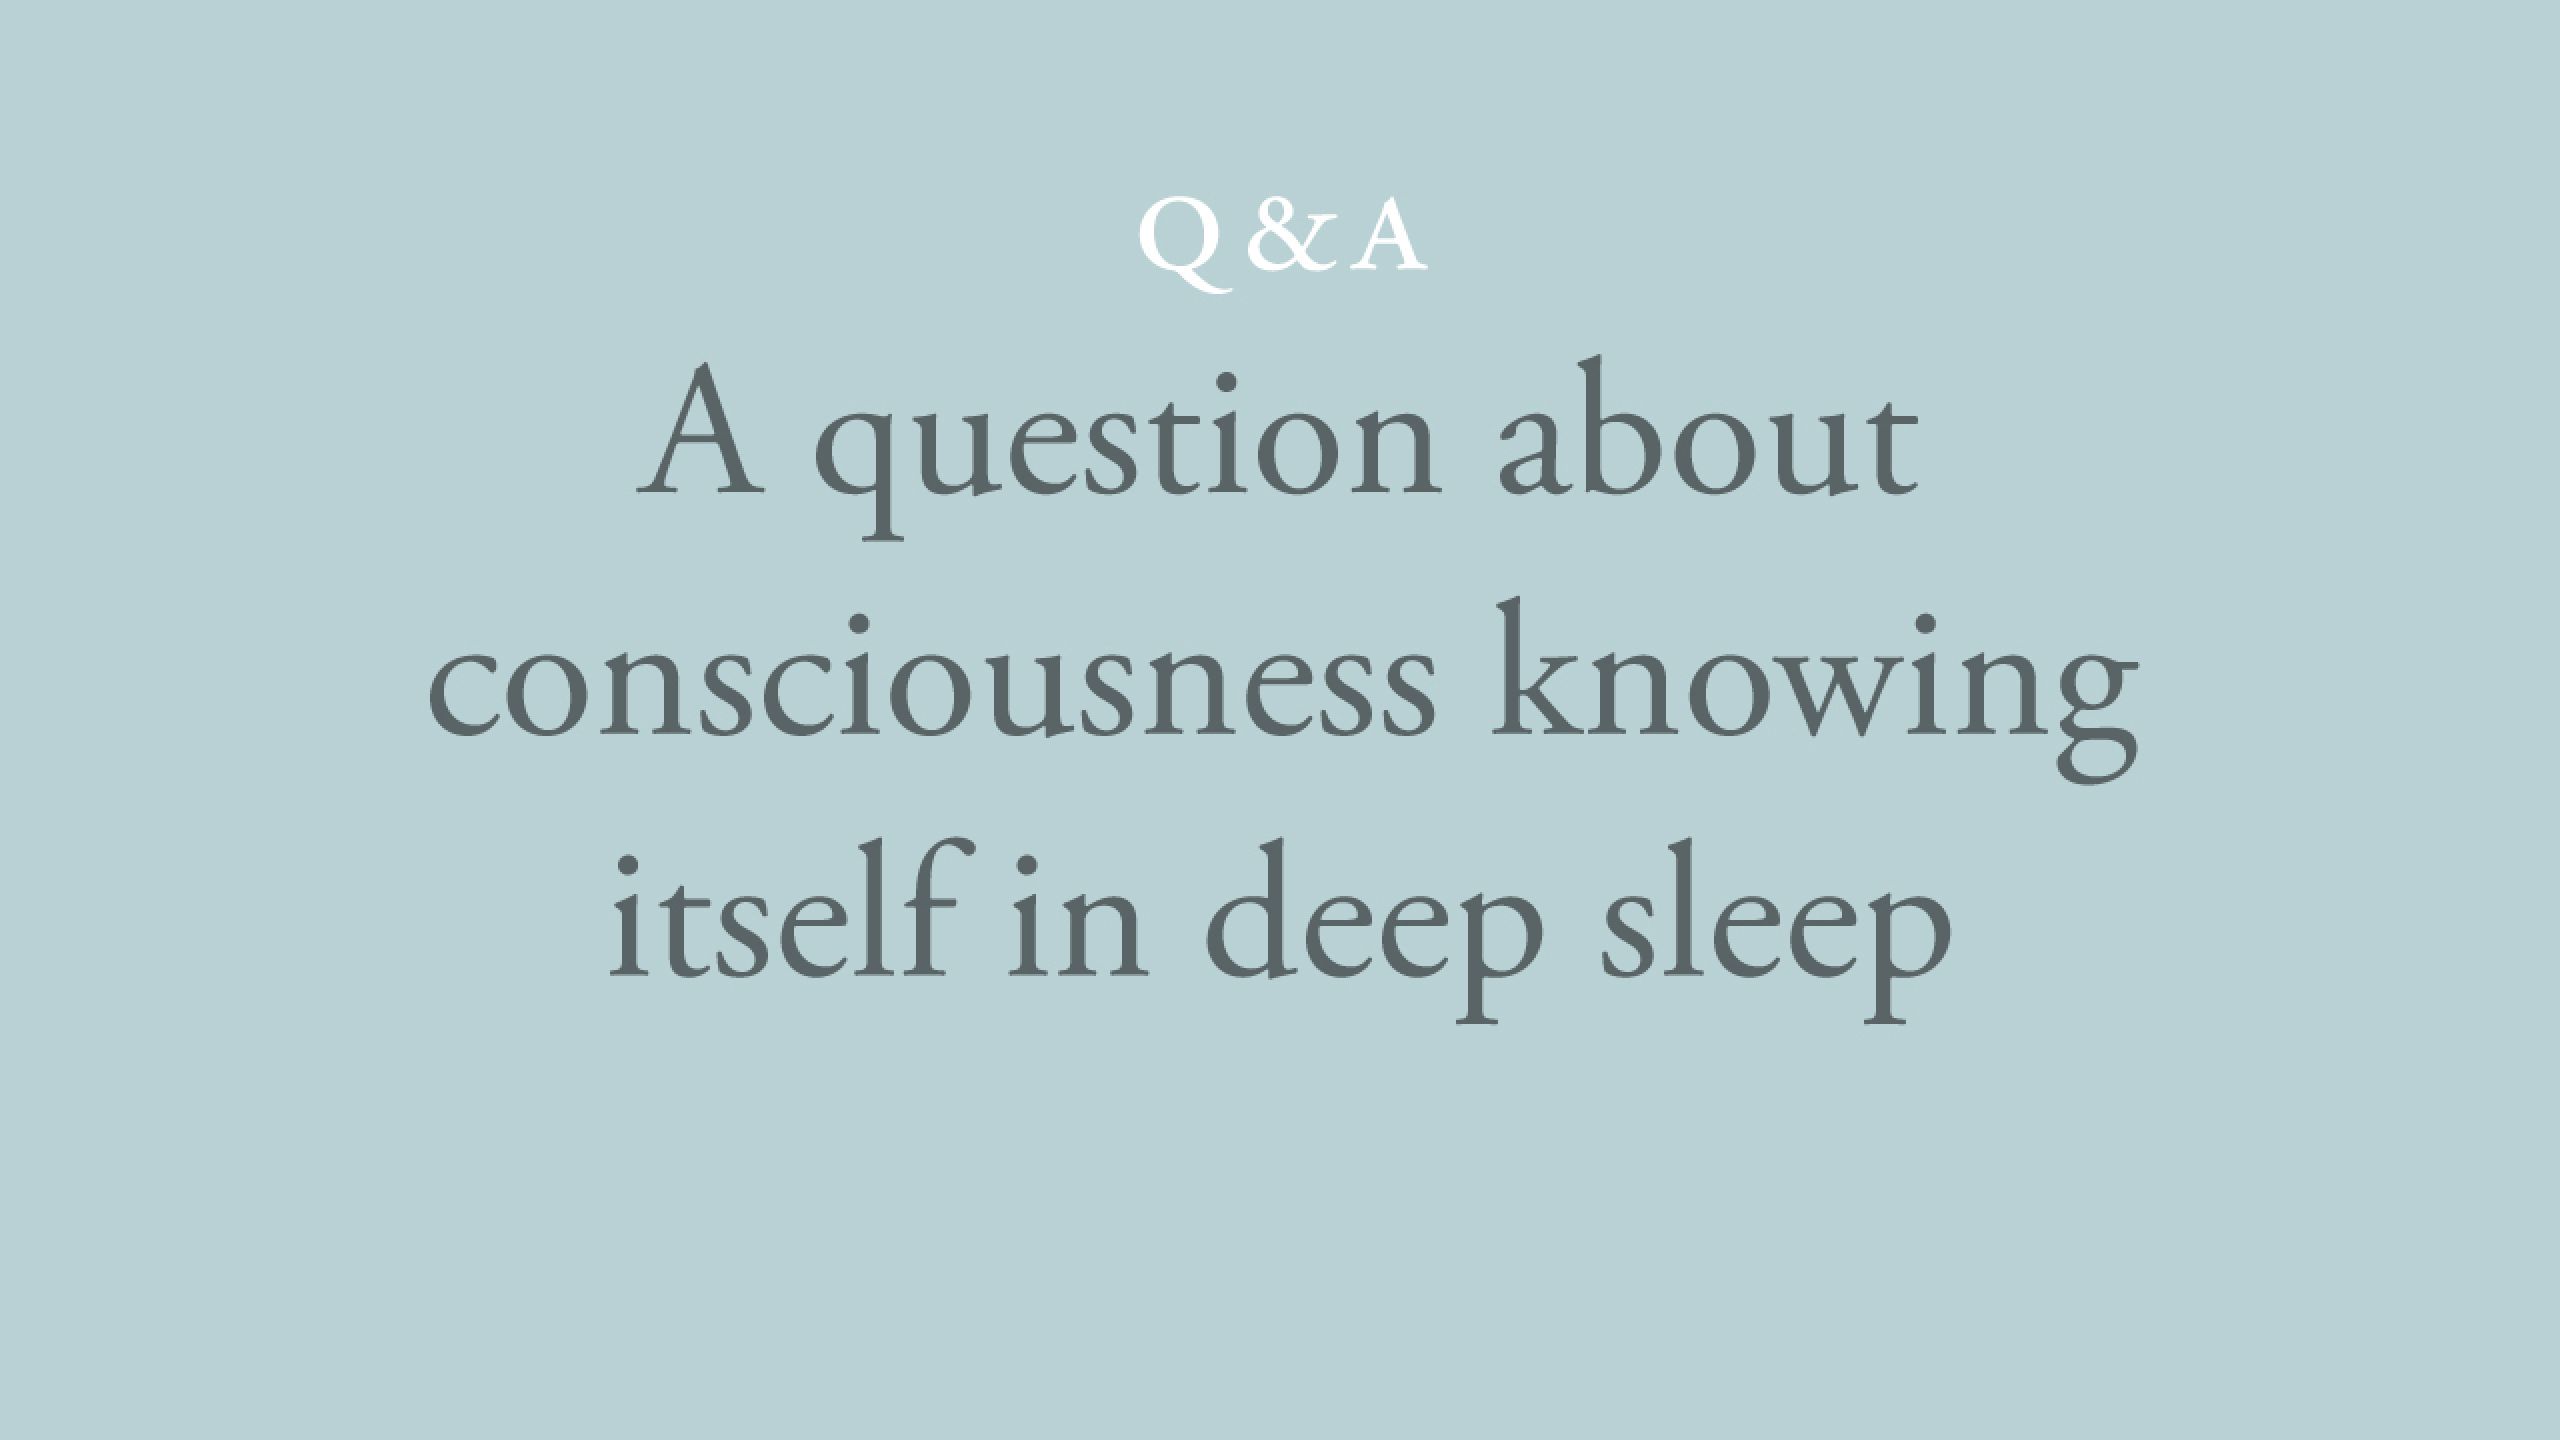 Does consciousness know itself when there is no experience?